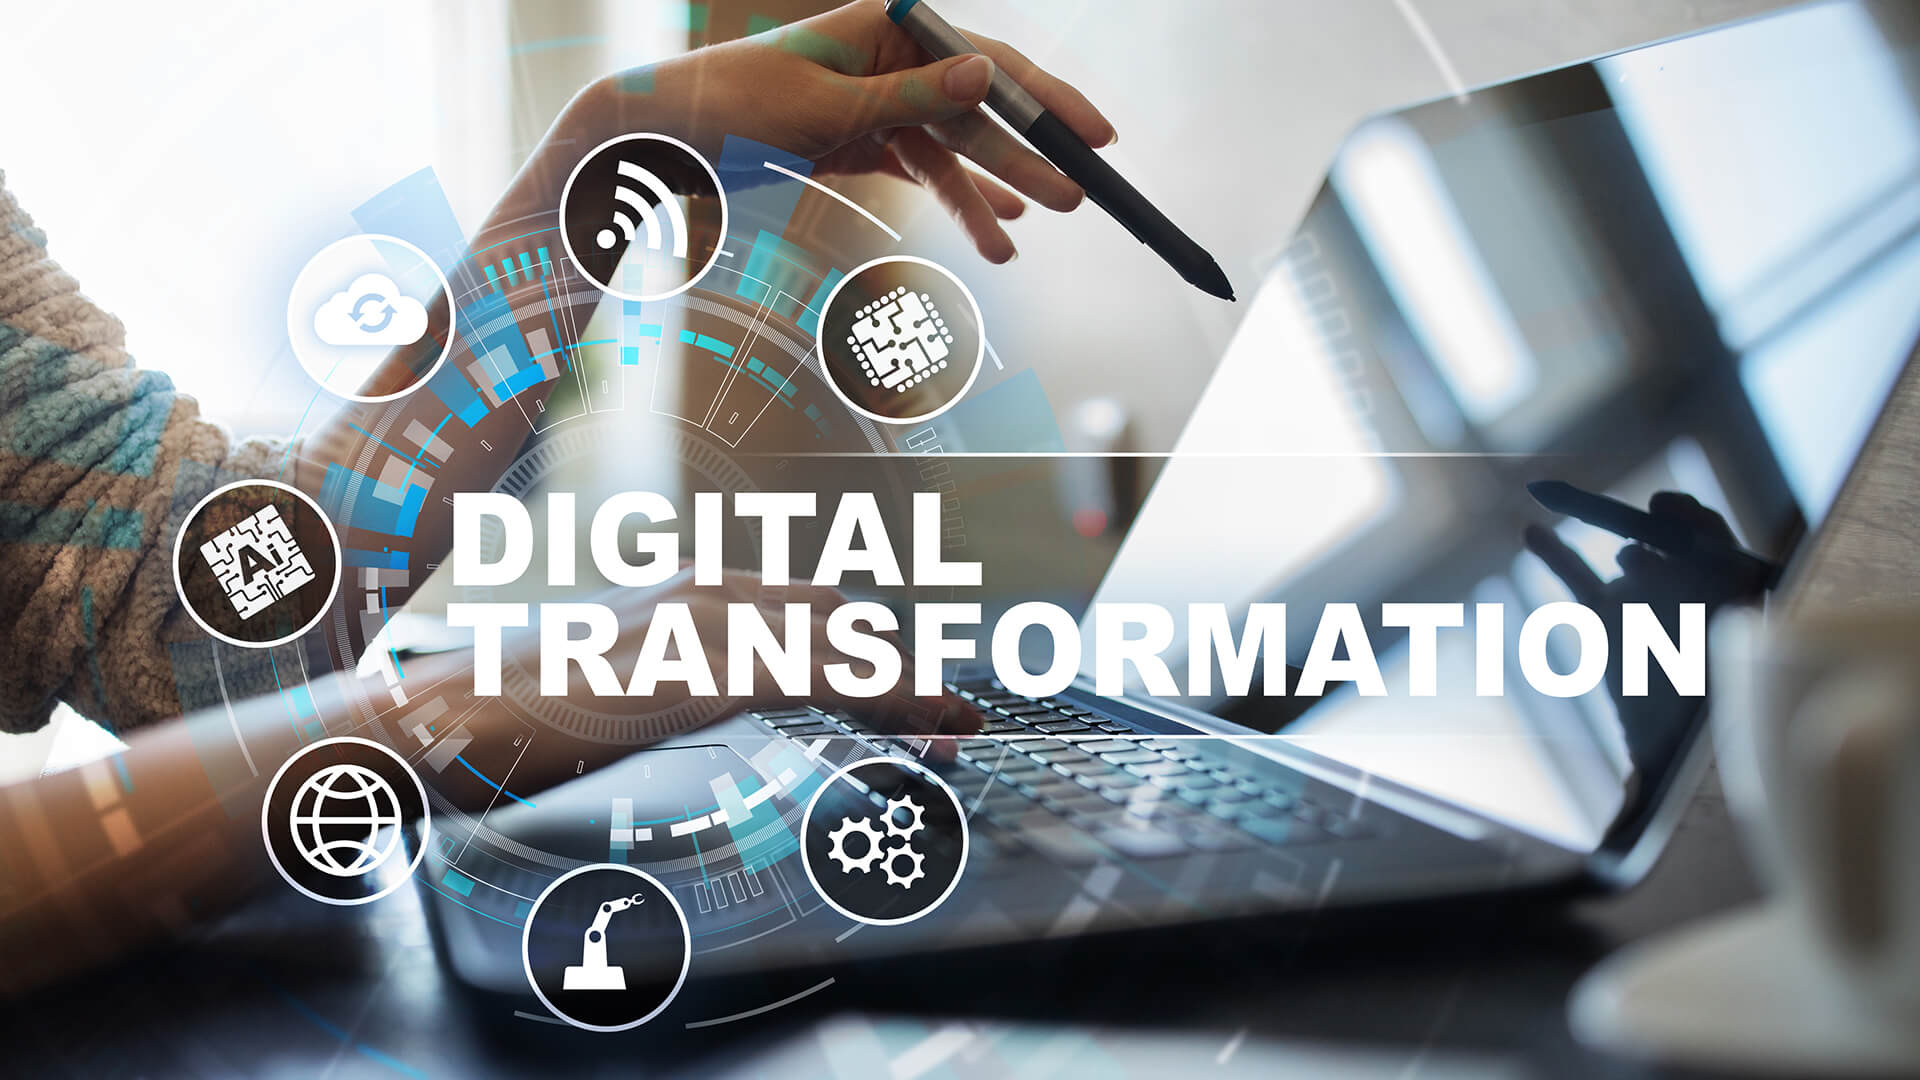 What are Digital Transformation and Its Key Trends in 2022?